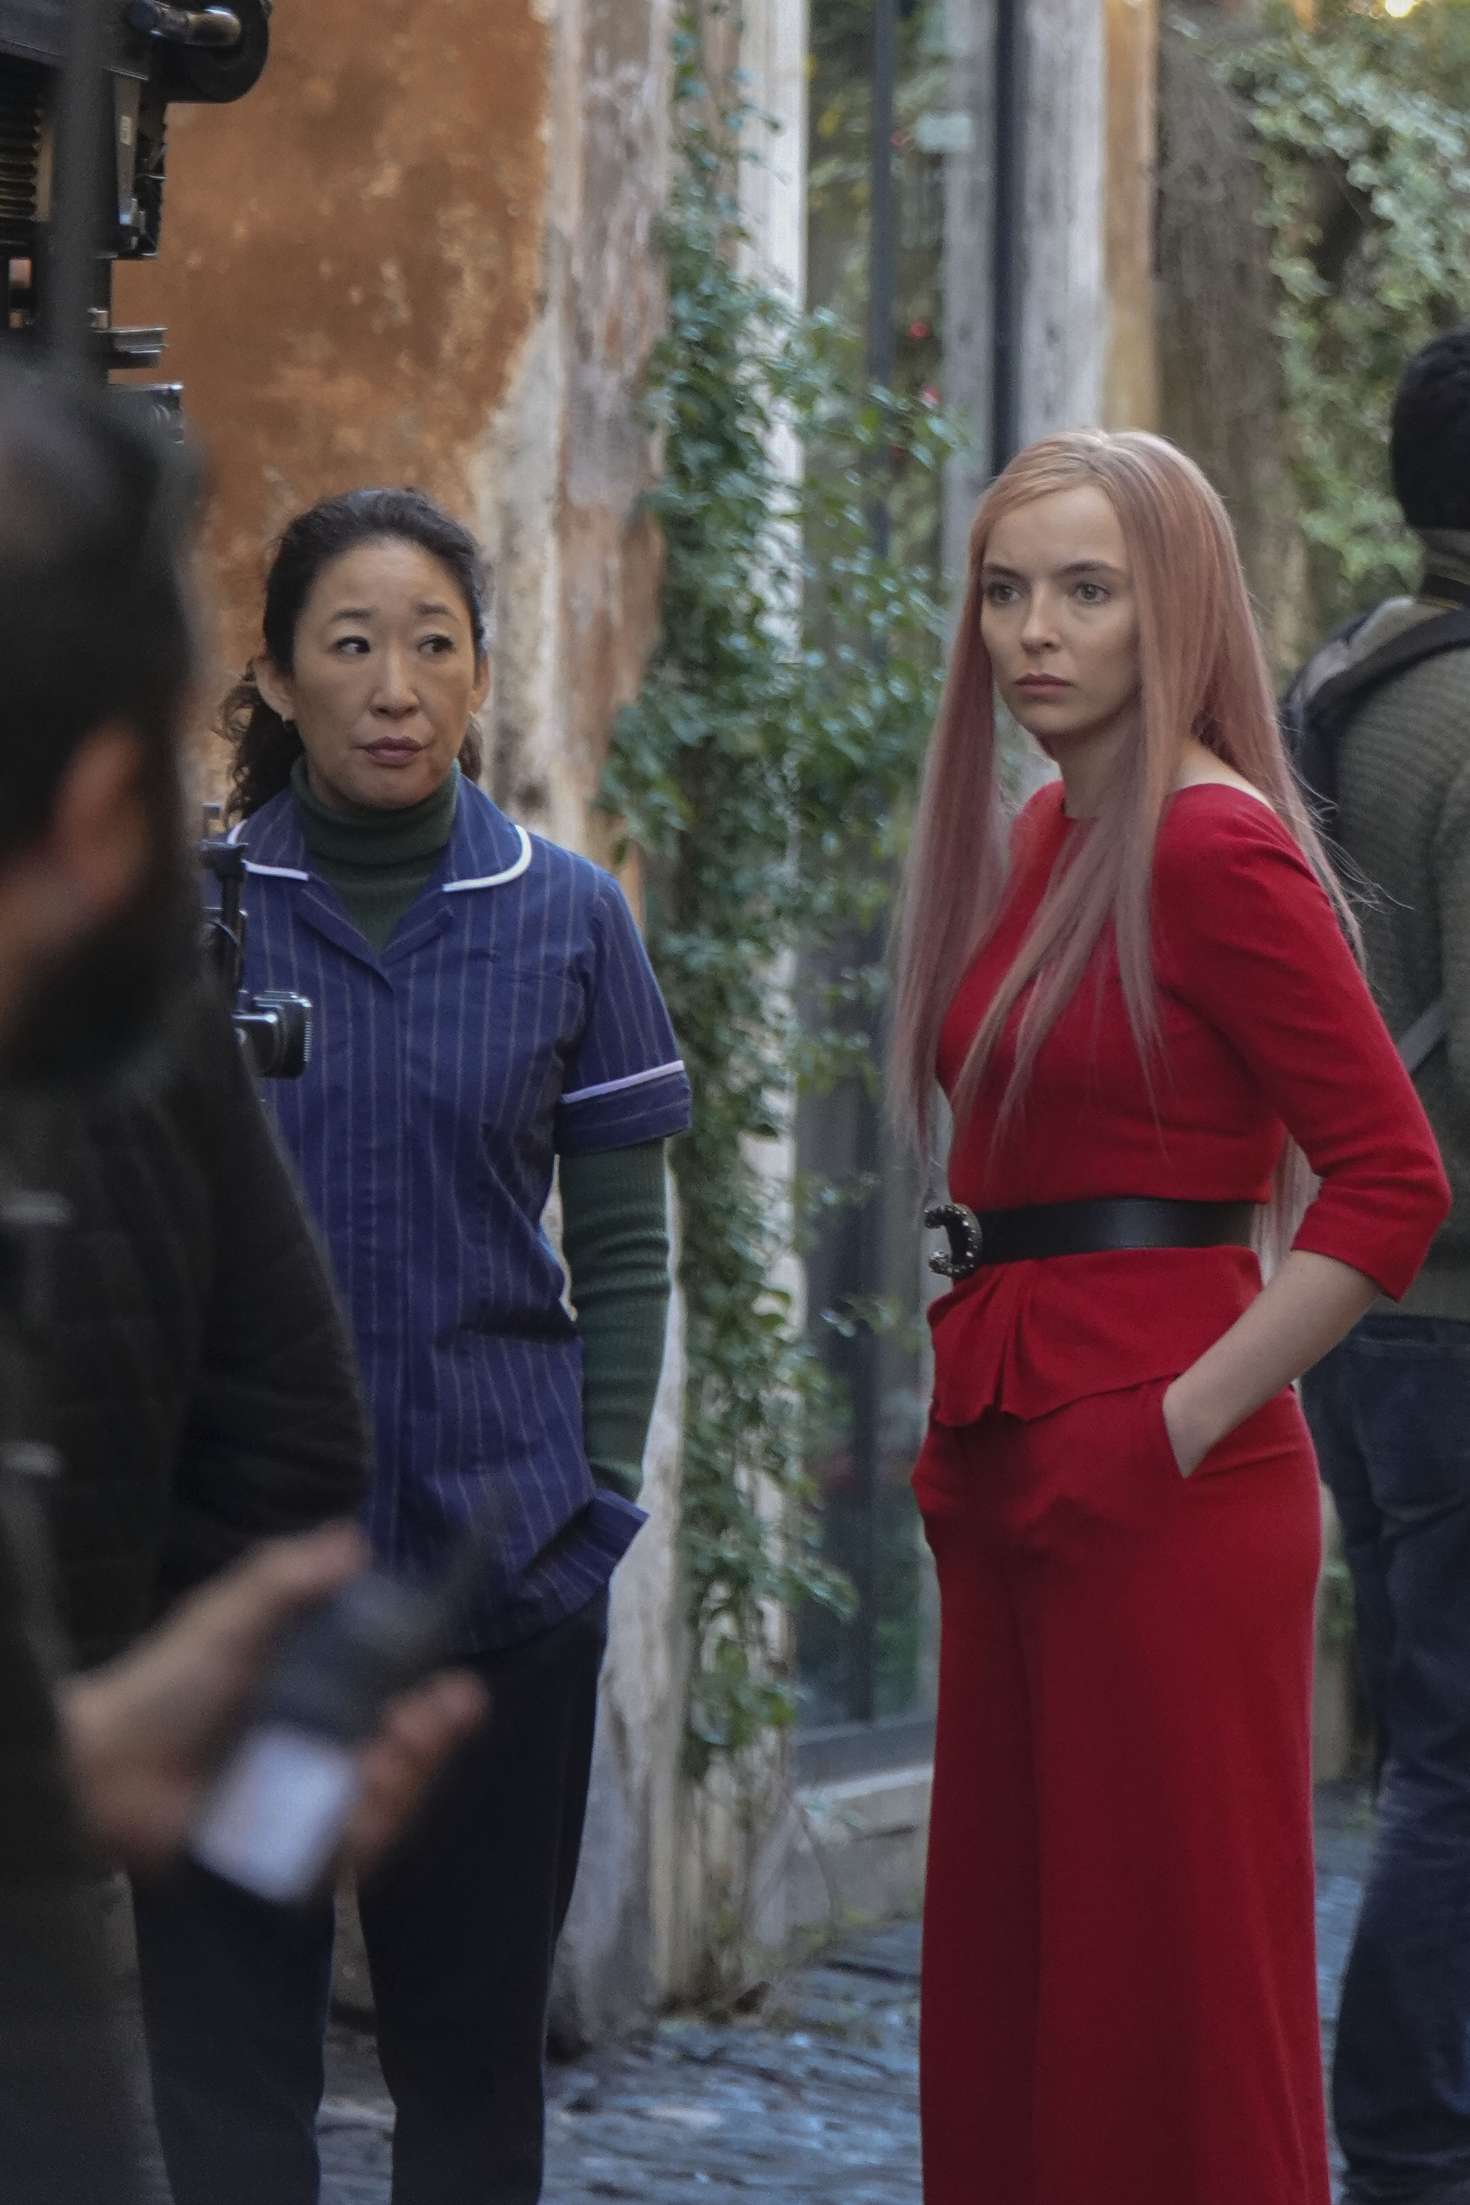 Jodie Comer and Sandra Oh - On the set of 'Killing Eve' in Rome